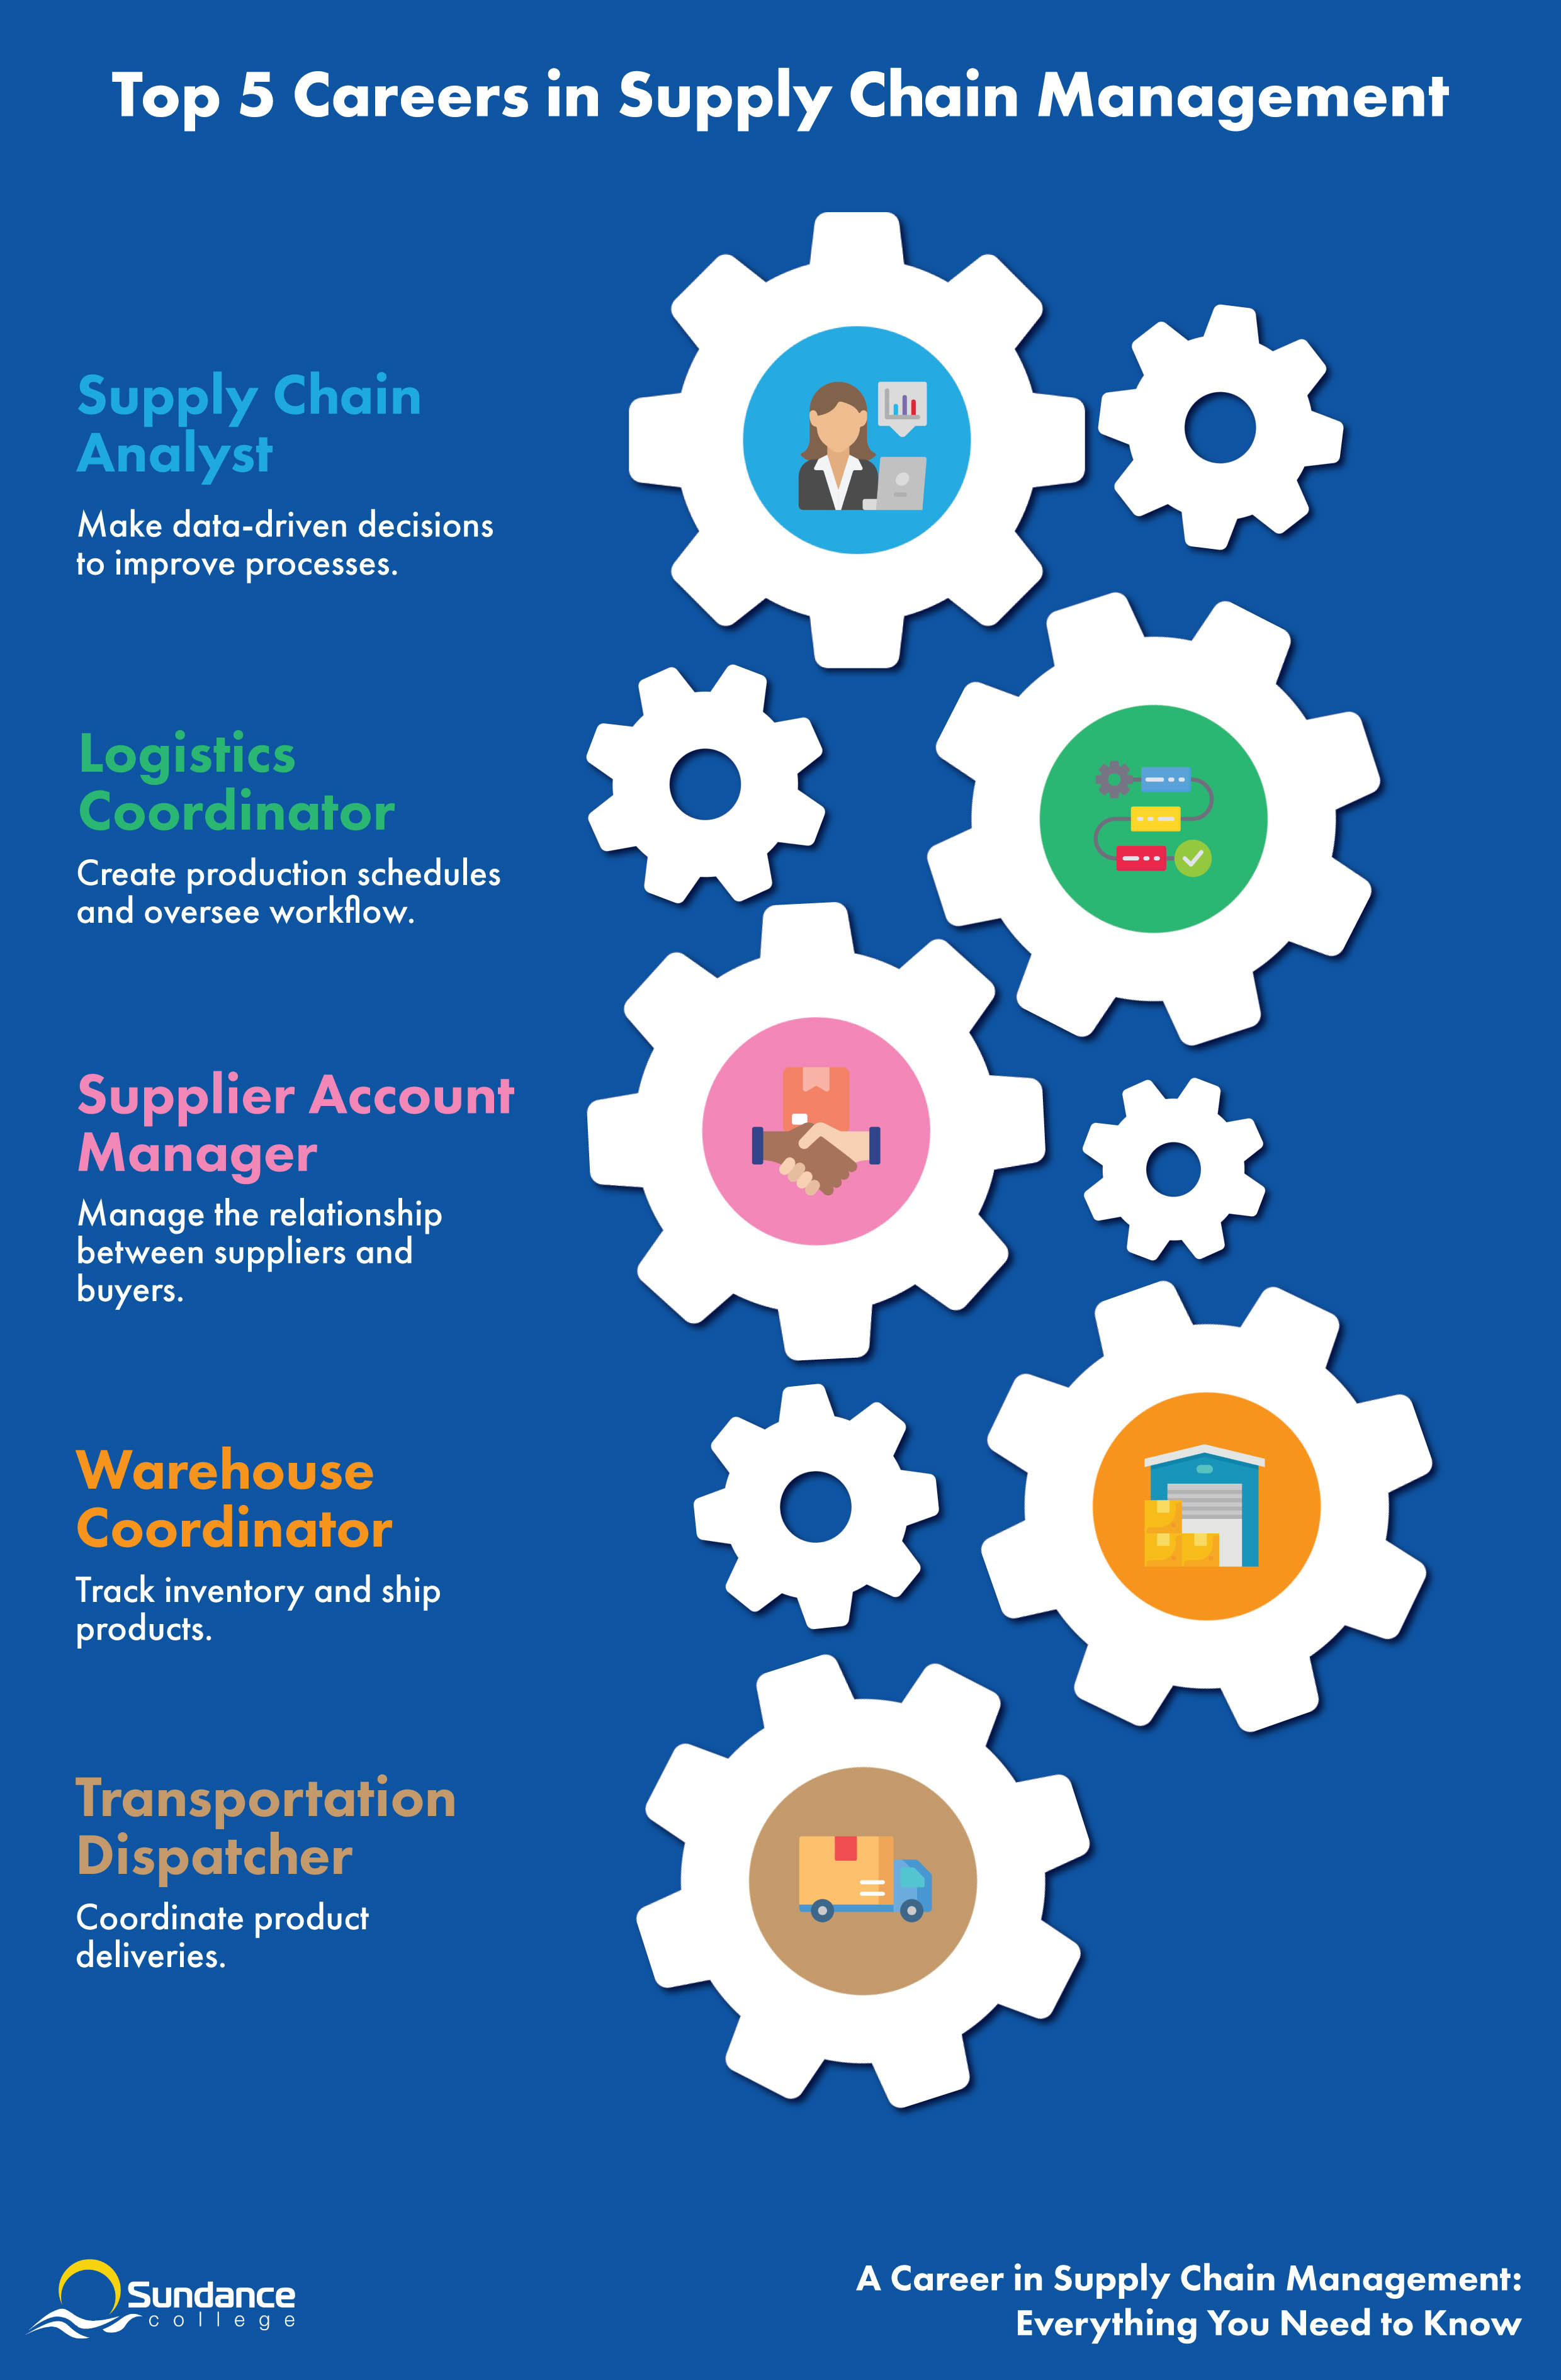 Infographic listing top 5 Supply Chain Management Careers: Supply Chain Analyst, Logistics Coordinator, Supplier Account Manager, Warehouse Coordinator, Transportation Dispatcher.